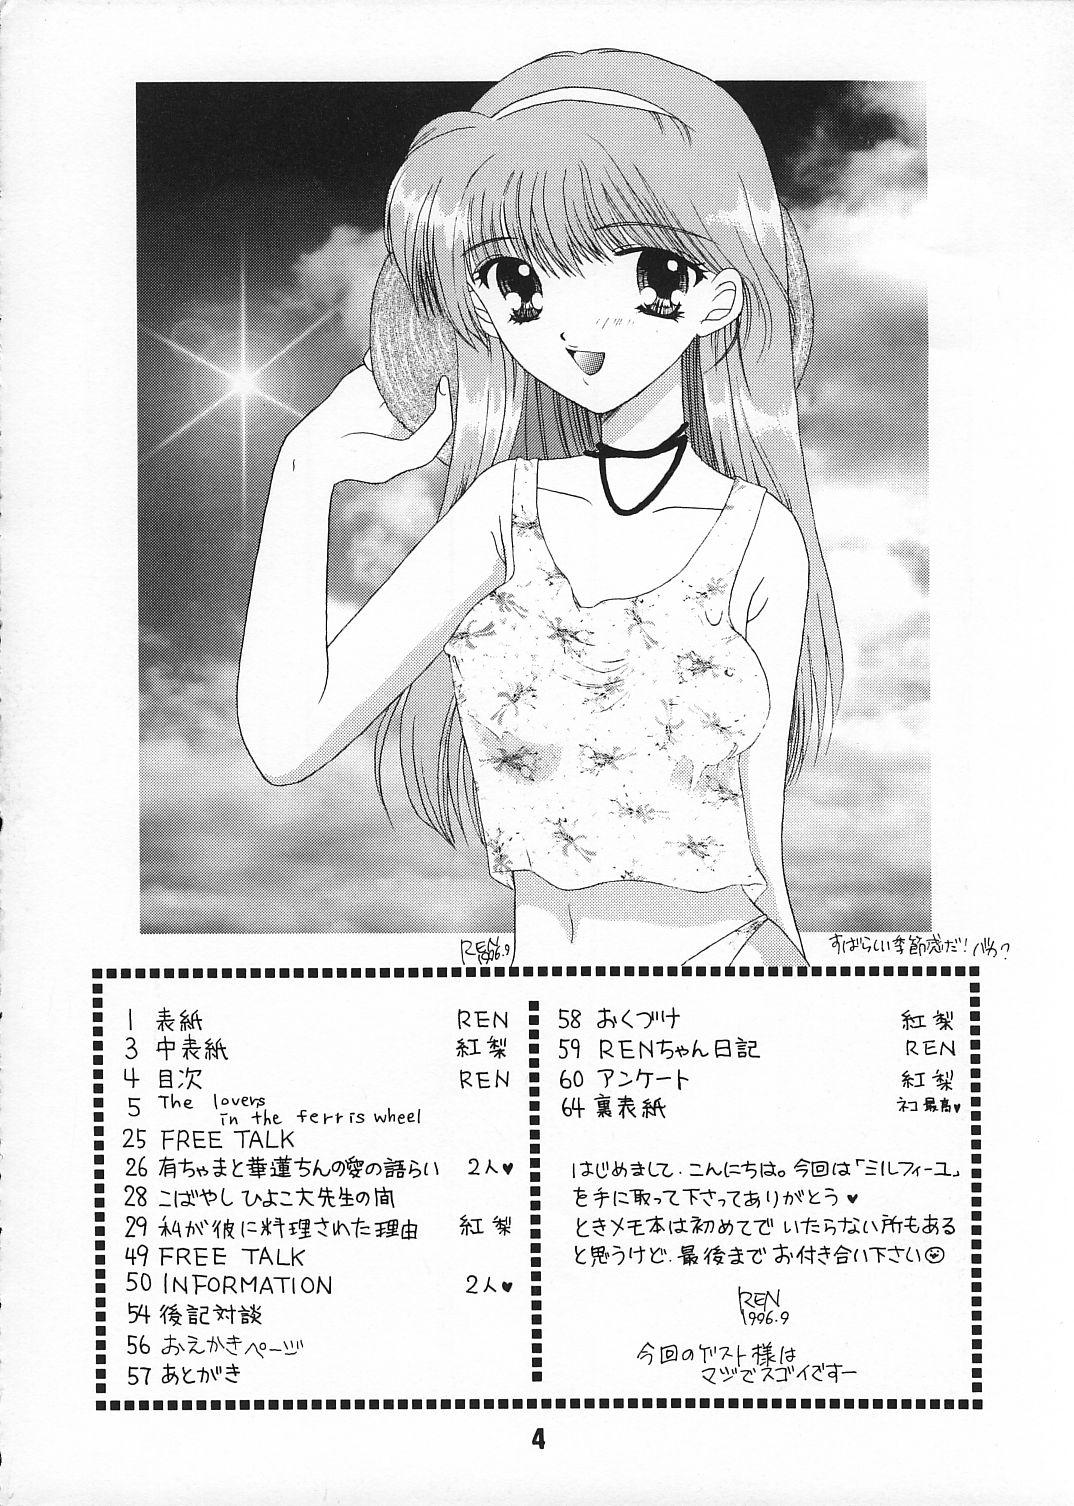 Missionary Mille-feuille - Tokimeki memorial Sex - Page 3